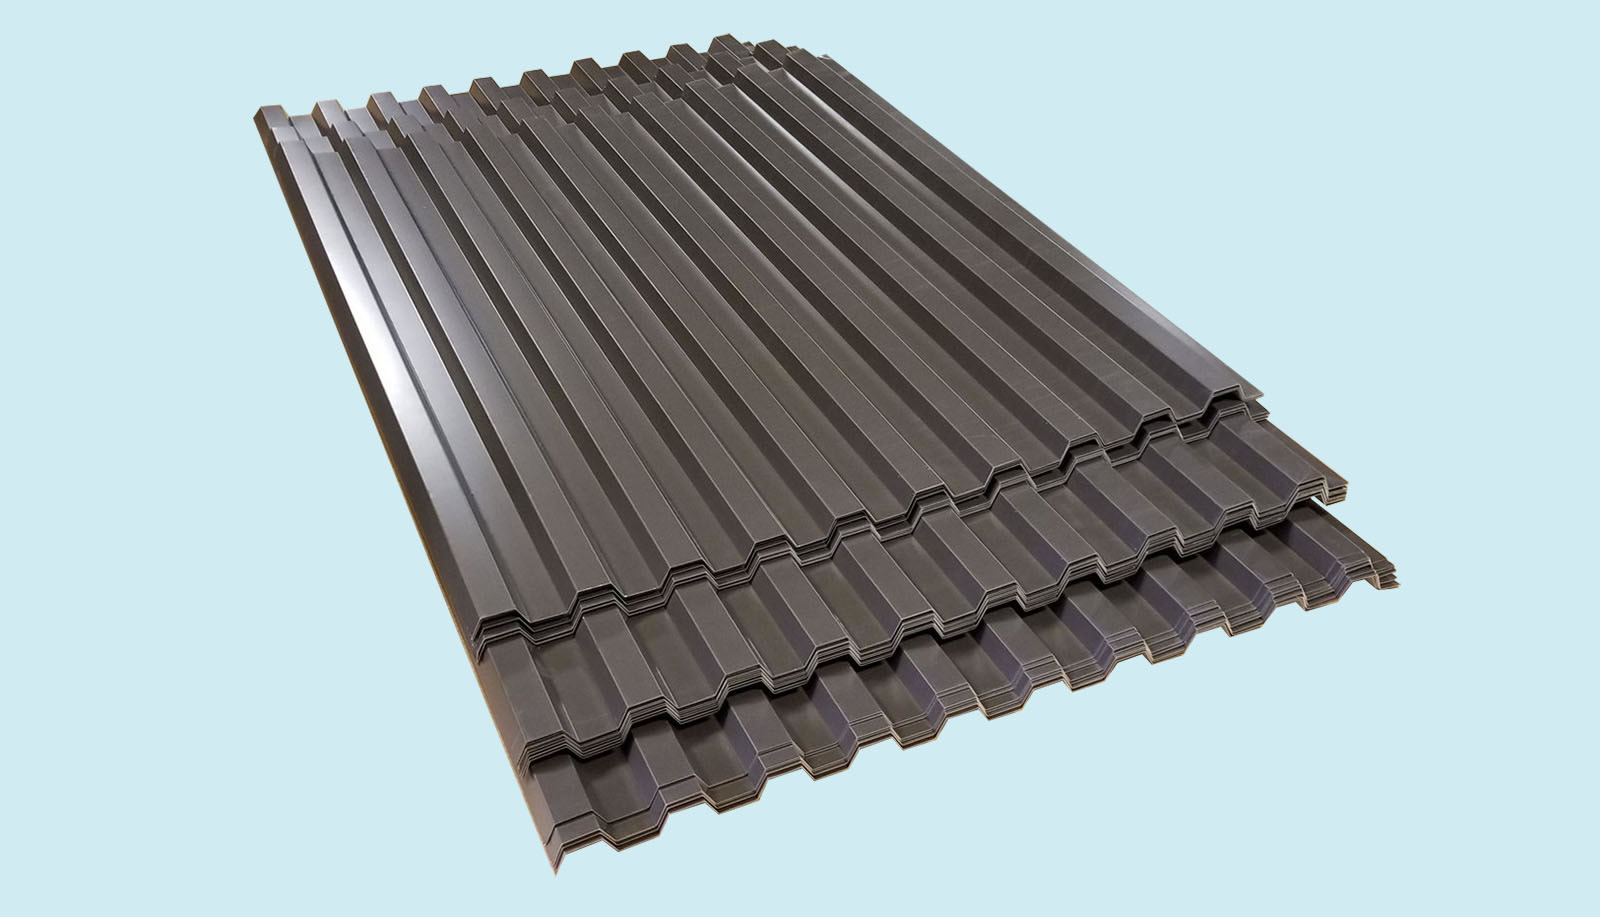 corrugated steel roof sheets stacked